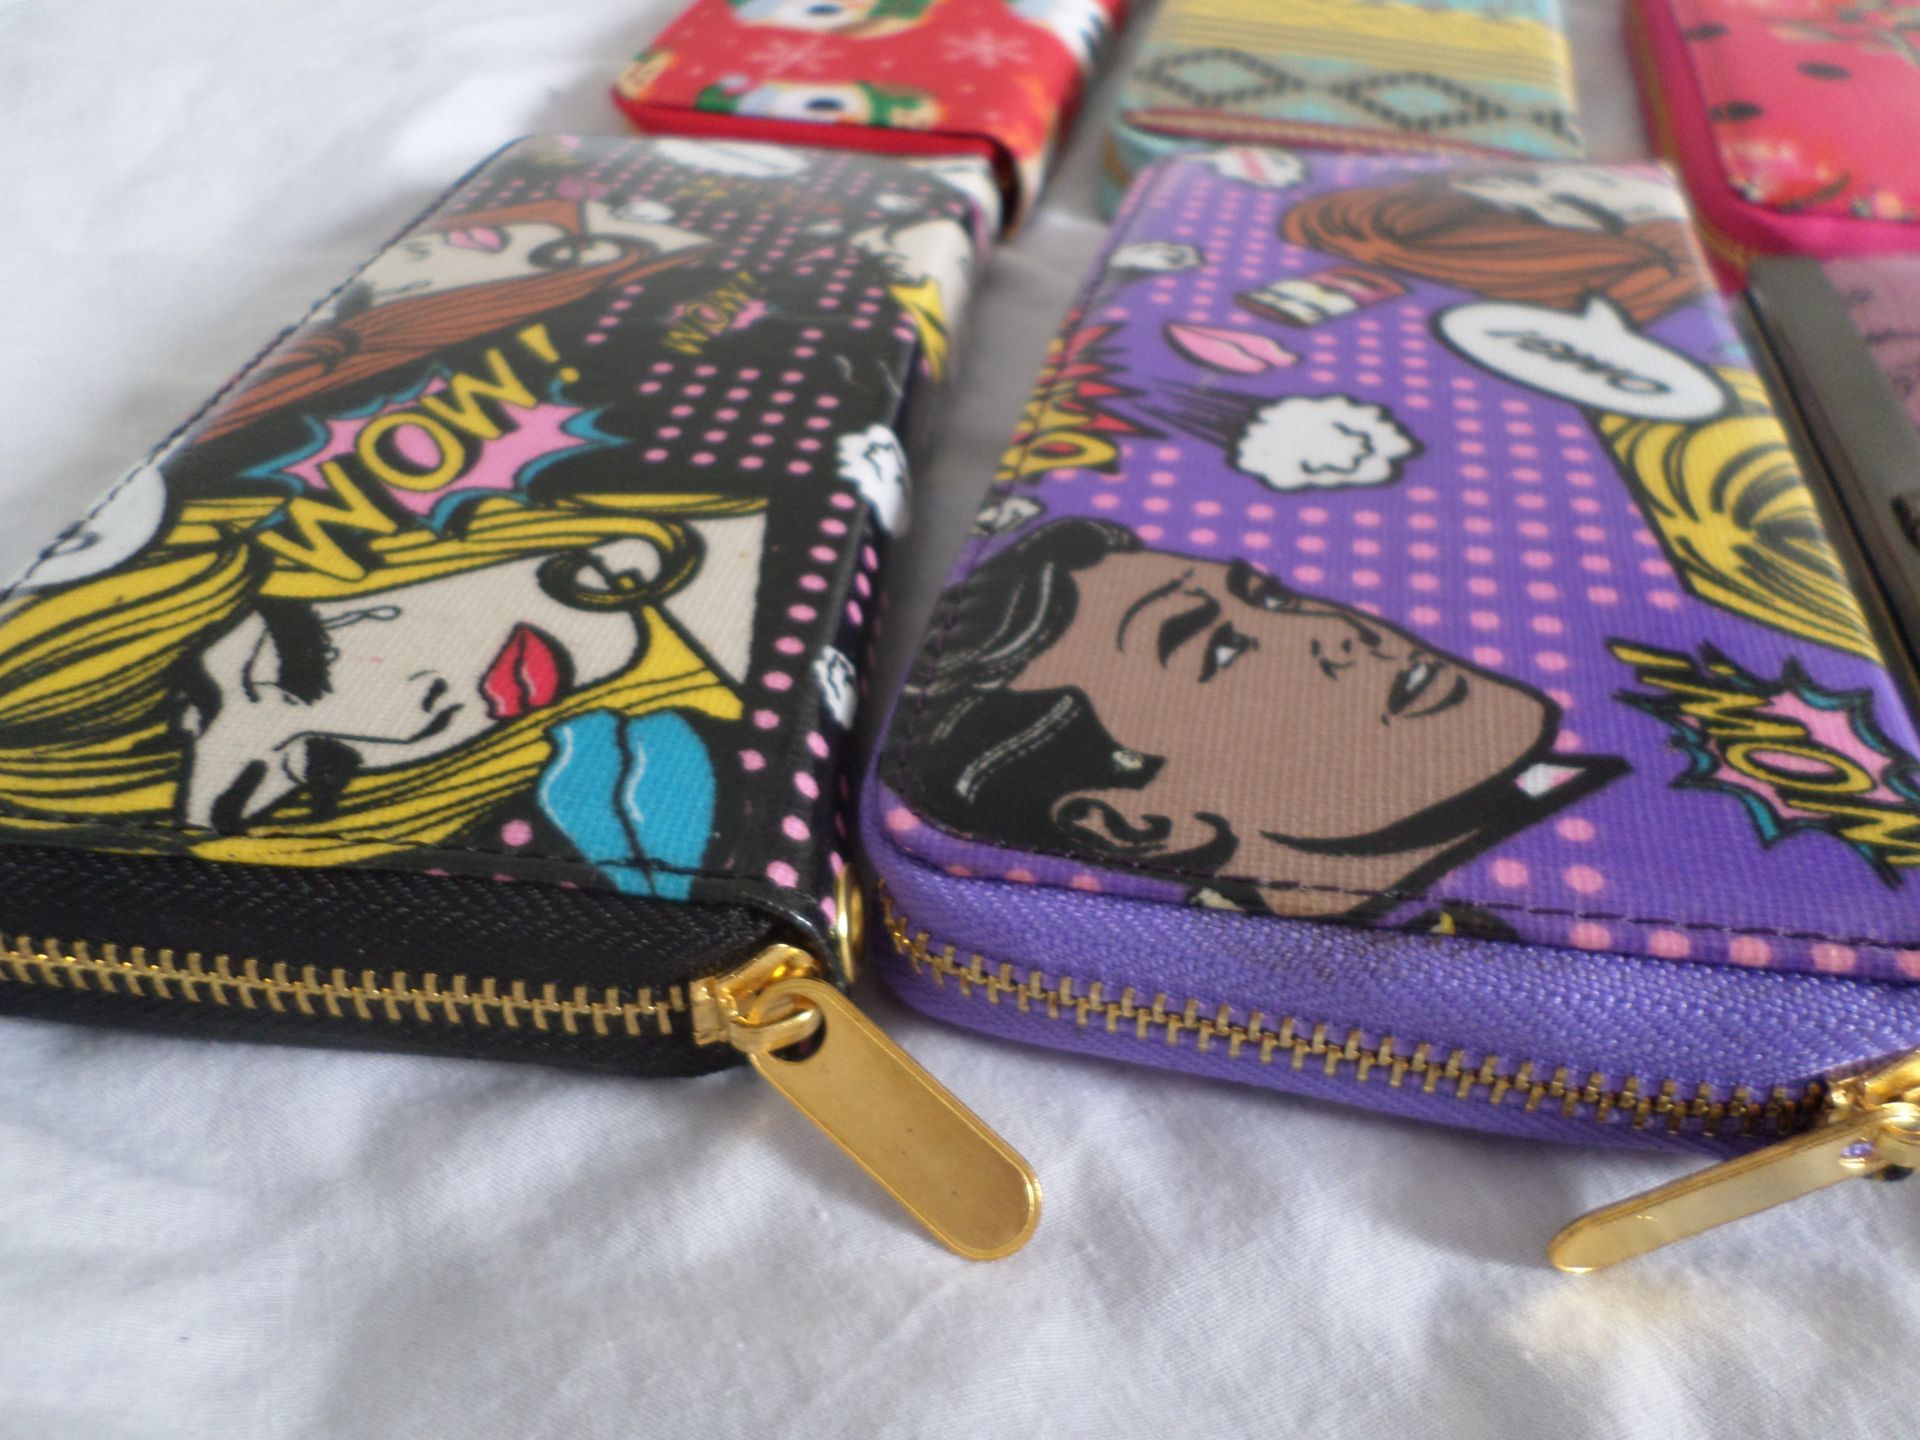 20 x Ladies Clutch/Purses RRP £14 Each. Brand New - Image 2 of 5